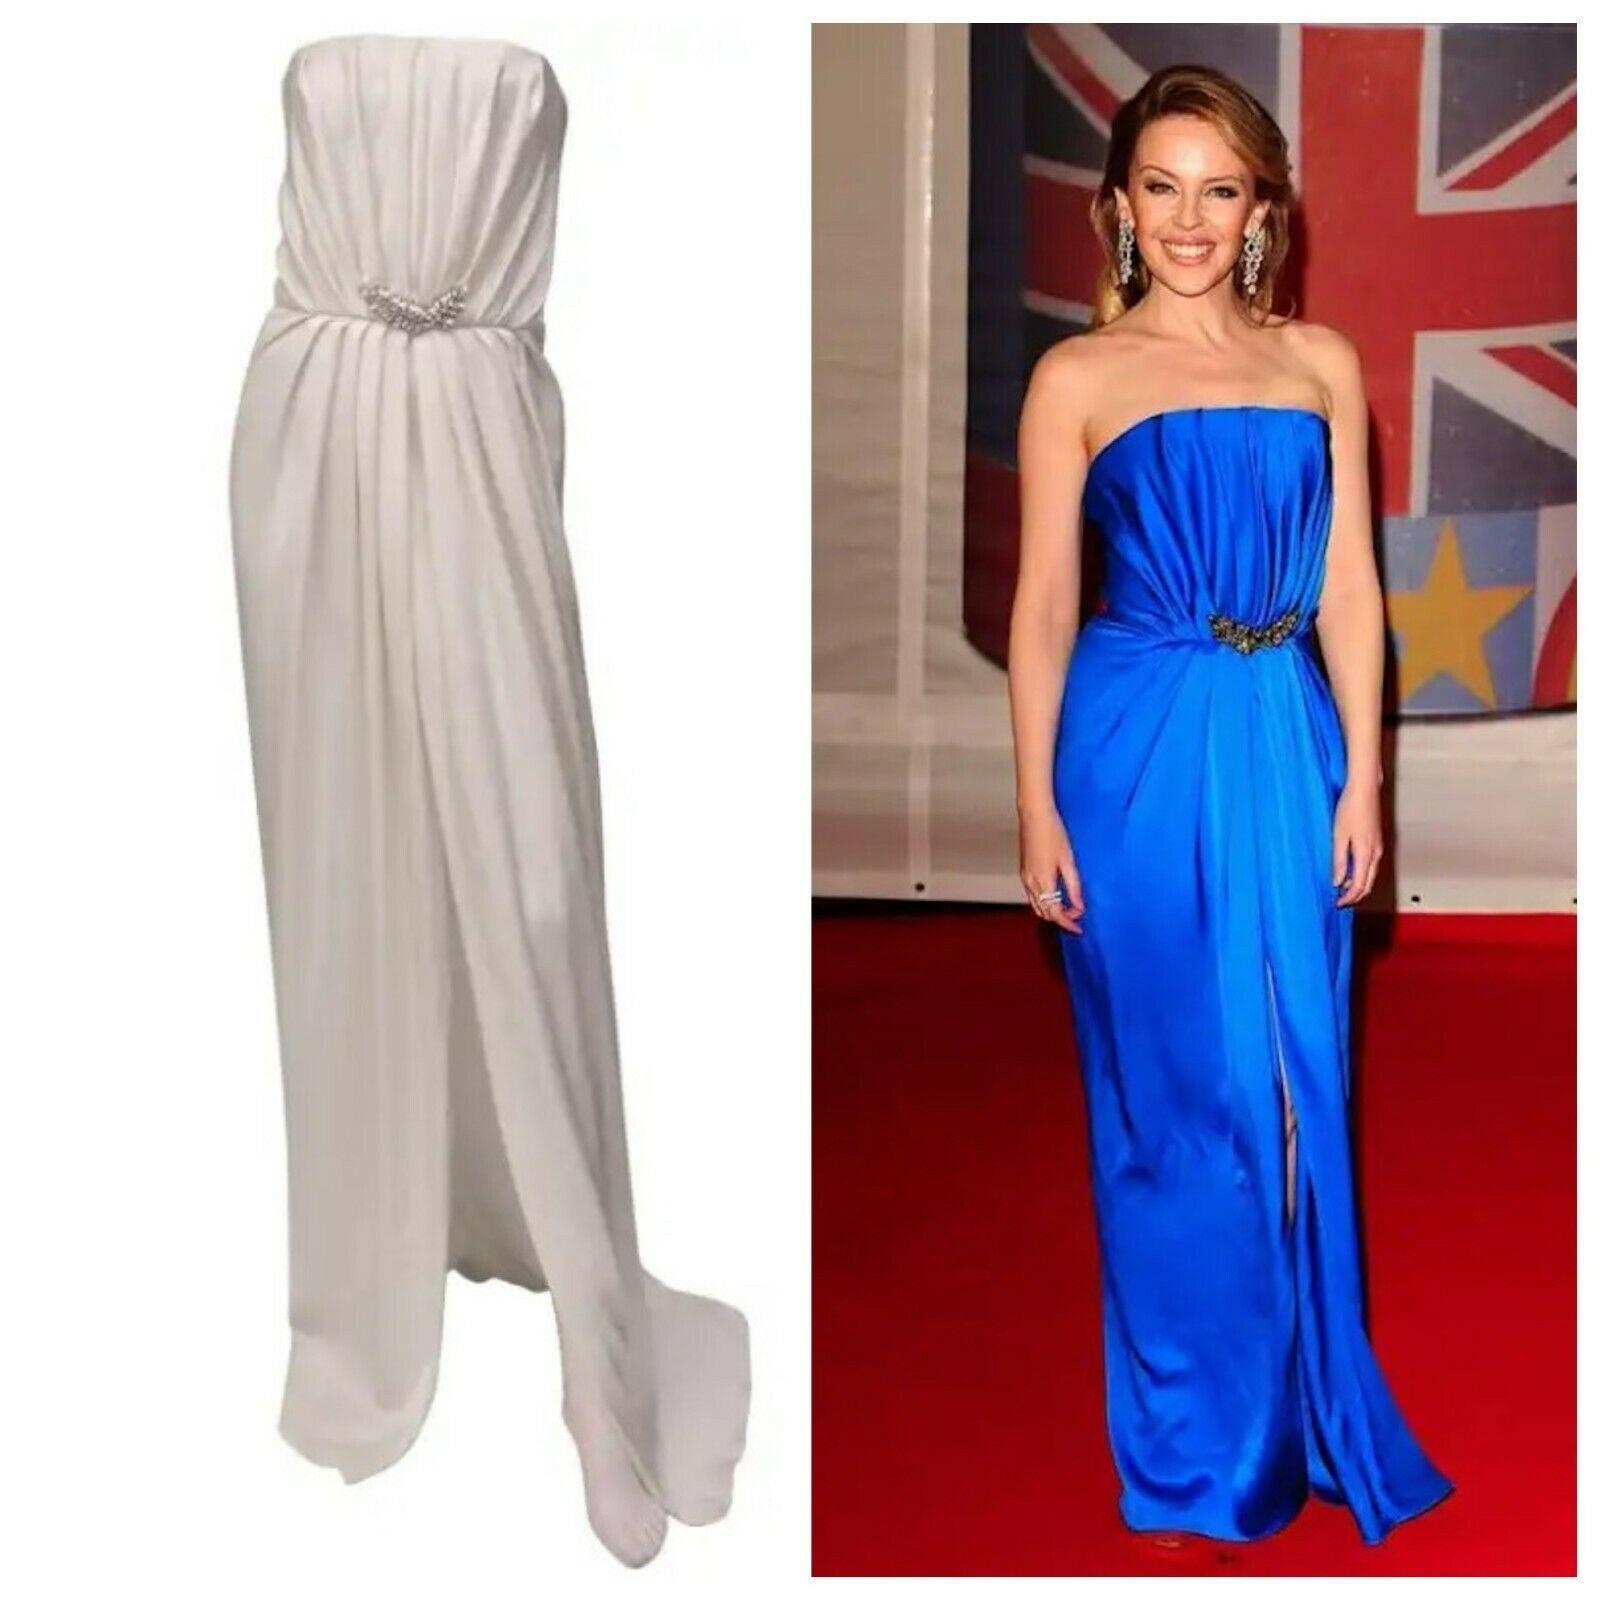 NWT Yves Saint Laurent Crystal Embellished Silk Dress Gown
2012 Collection
French size 44 - US 12
Carla Bruni-Sarkozy Looked Stunning in this Column Dress by Saint Laurent.
Kylie Minogue Wore the same Gown to the BRIT Awards.
Now it's Your Chance to